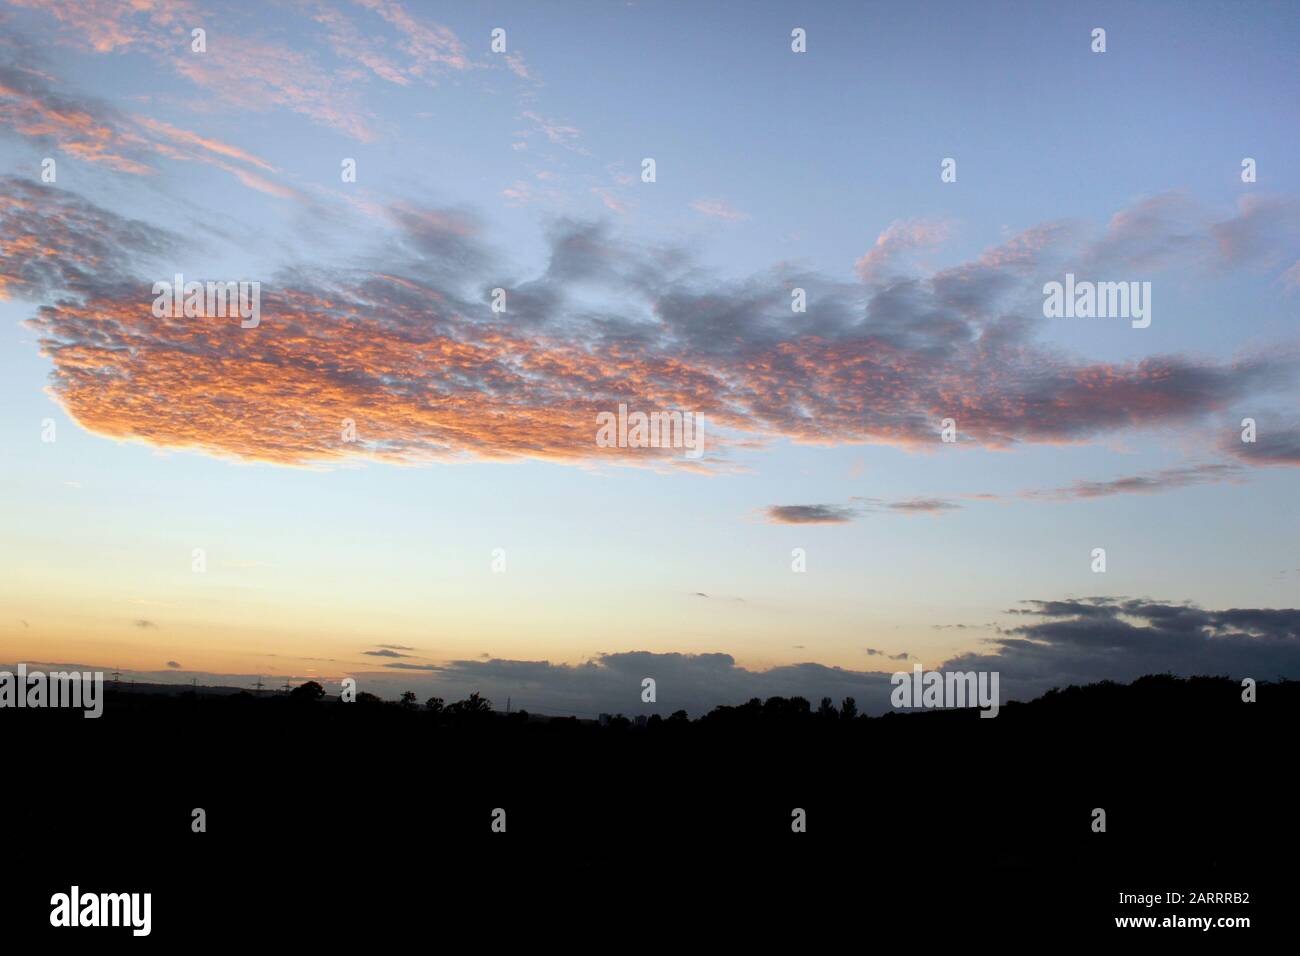 Rare and unusual cloud formation in September sky Stock Photo